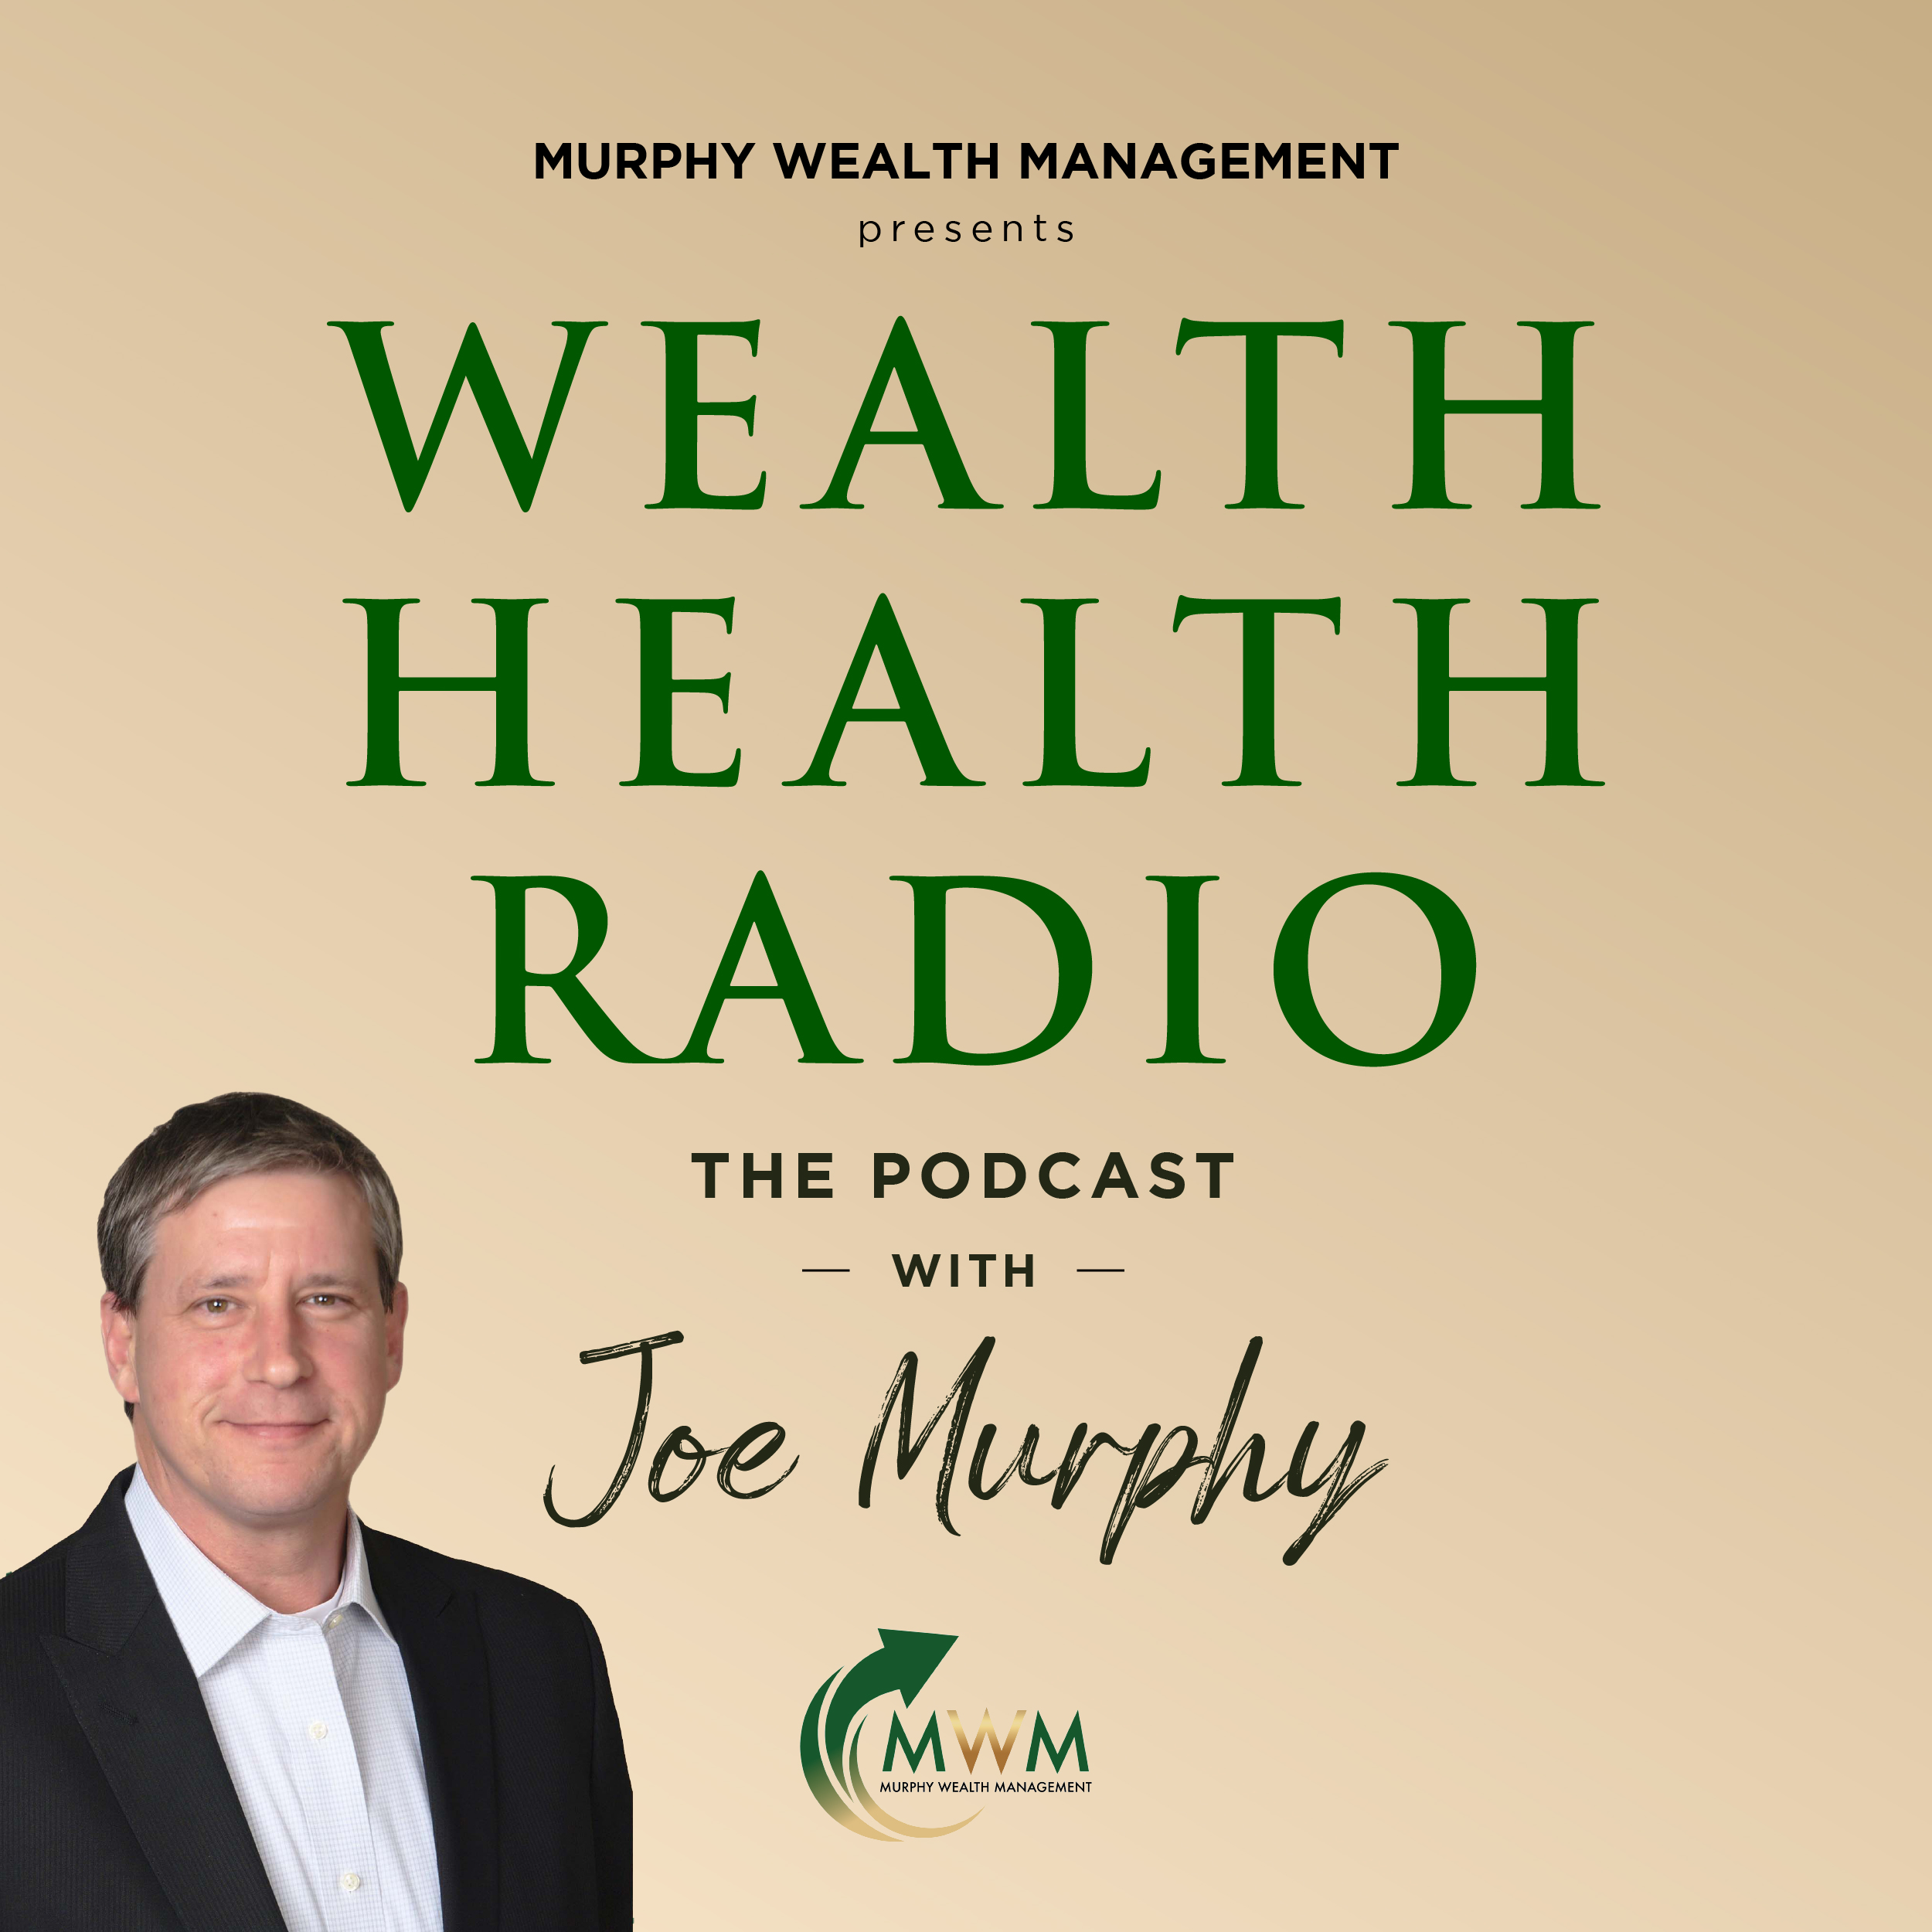 Wealth Health Radio Expect the unexpected, that’s how Joe Murphy describes retirement planning in three words.